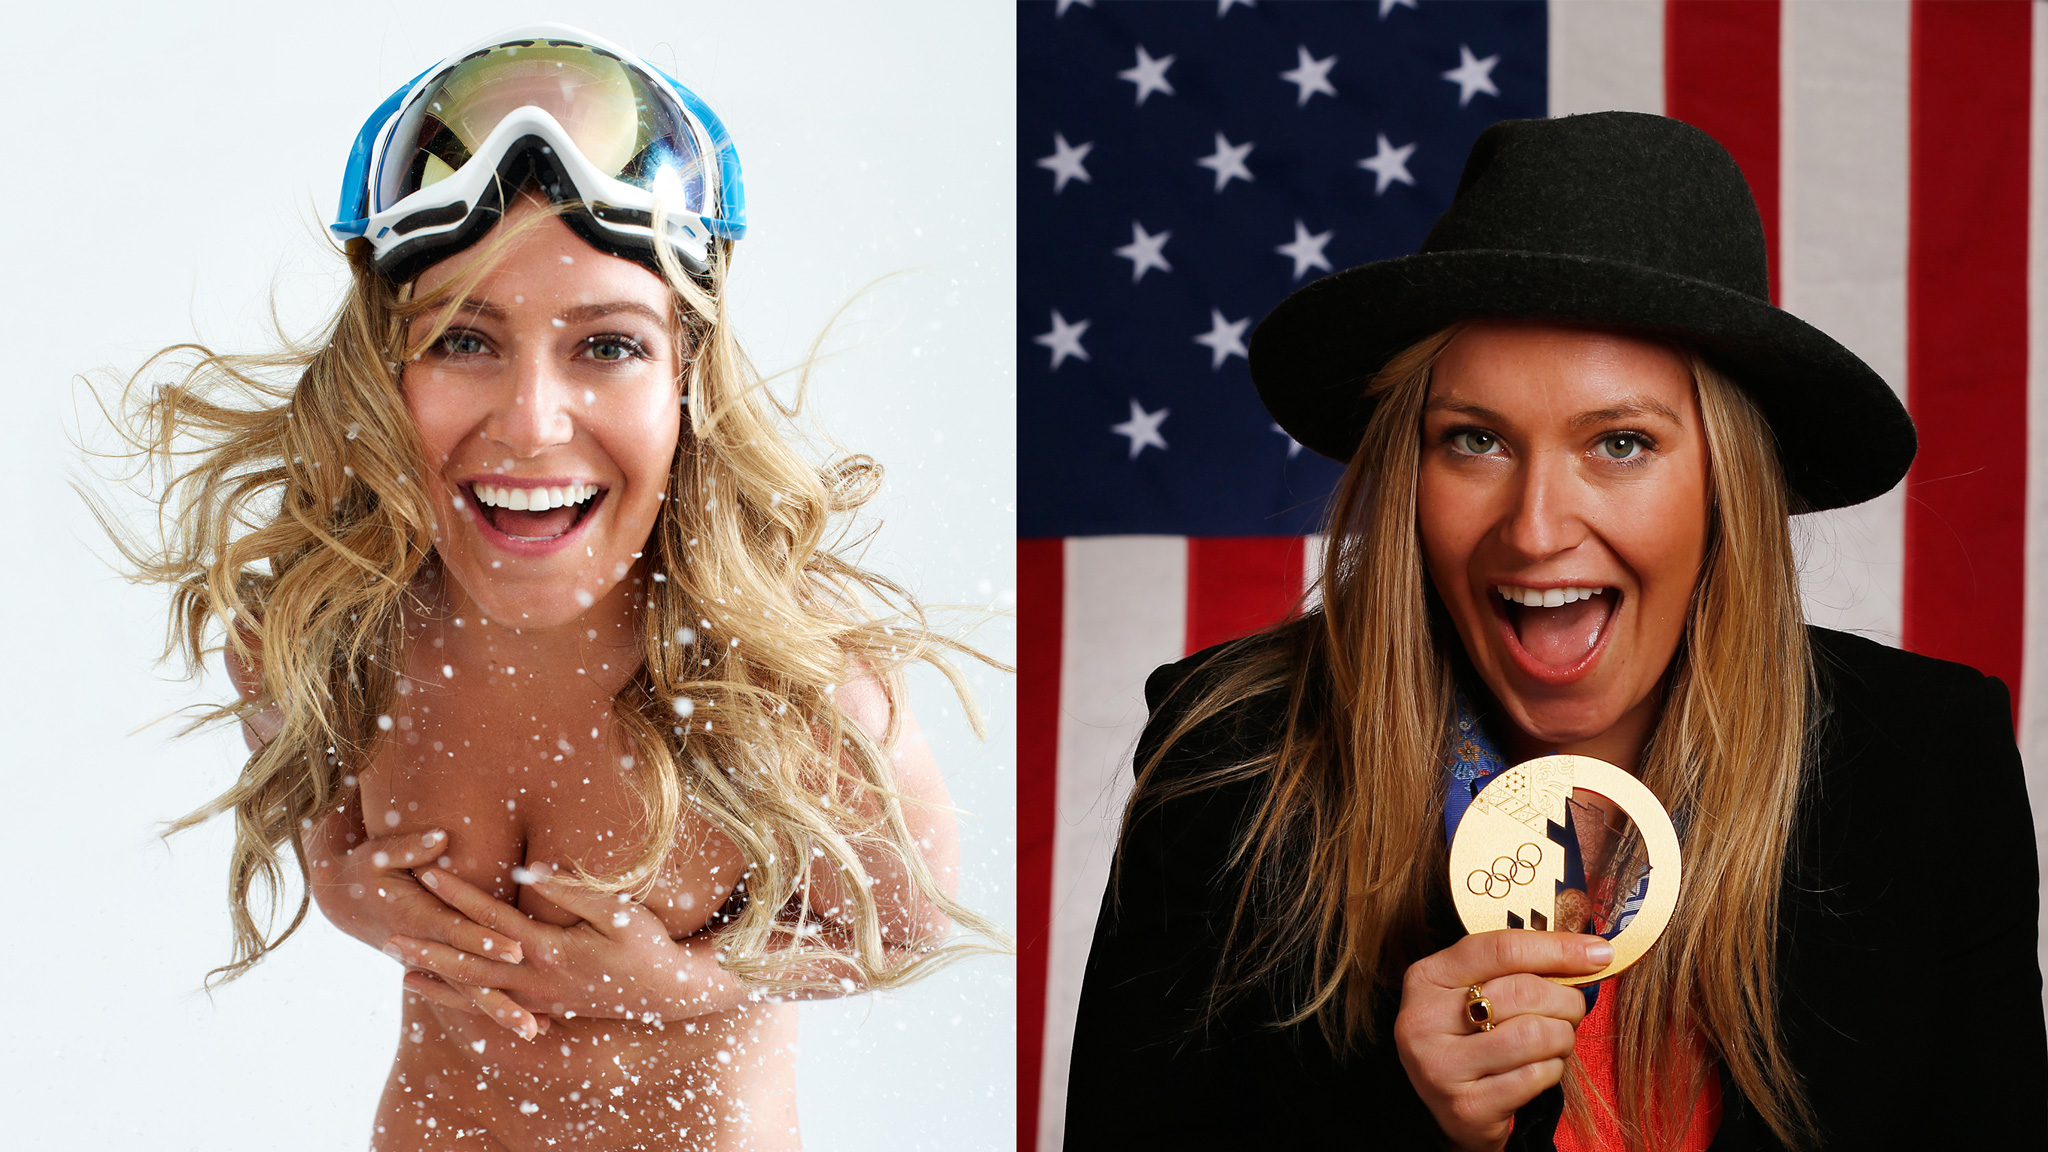 Take a look back a year in the crazy life of snowboard superstar, and Olymp...